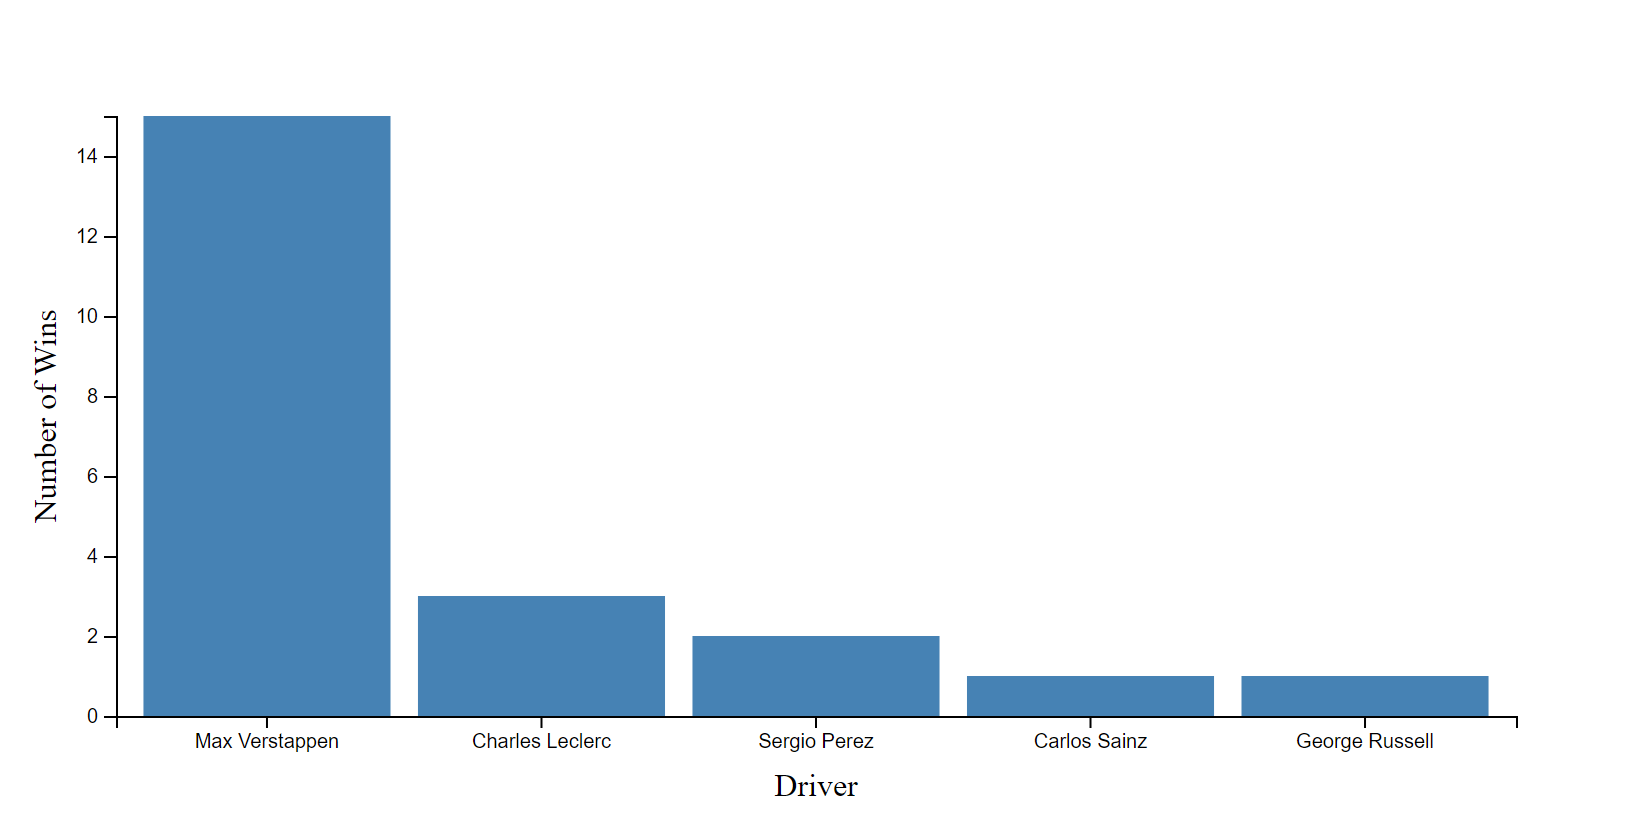 bar chart with the x-axis labeled "Driver" and the y-axis labeled "Number of Wins", containing five blue bars labeled with driver names, and with clear labels for values on the y-axis